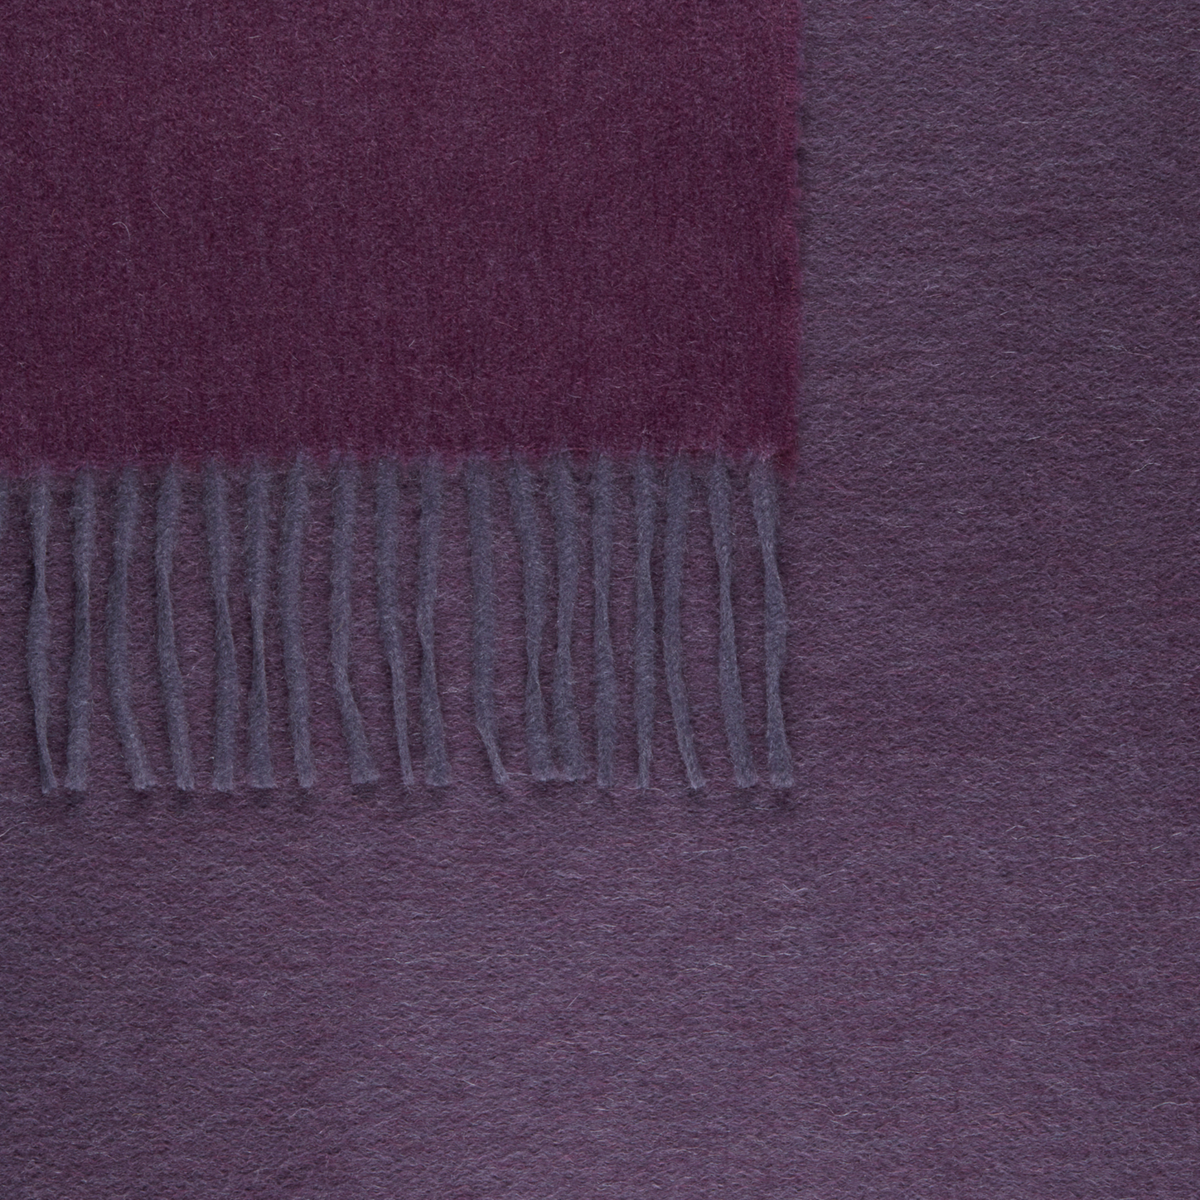 Swatch Sample of Matouk Paley Throws in Night/Mulberry Color